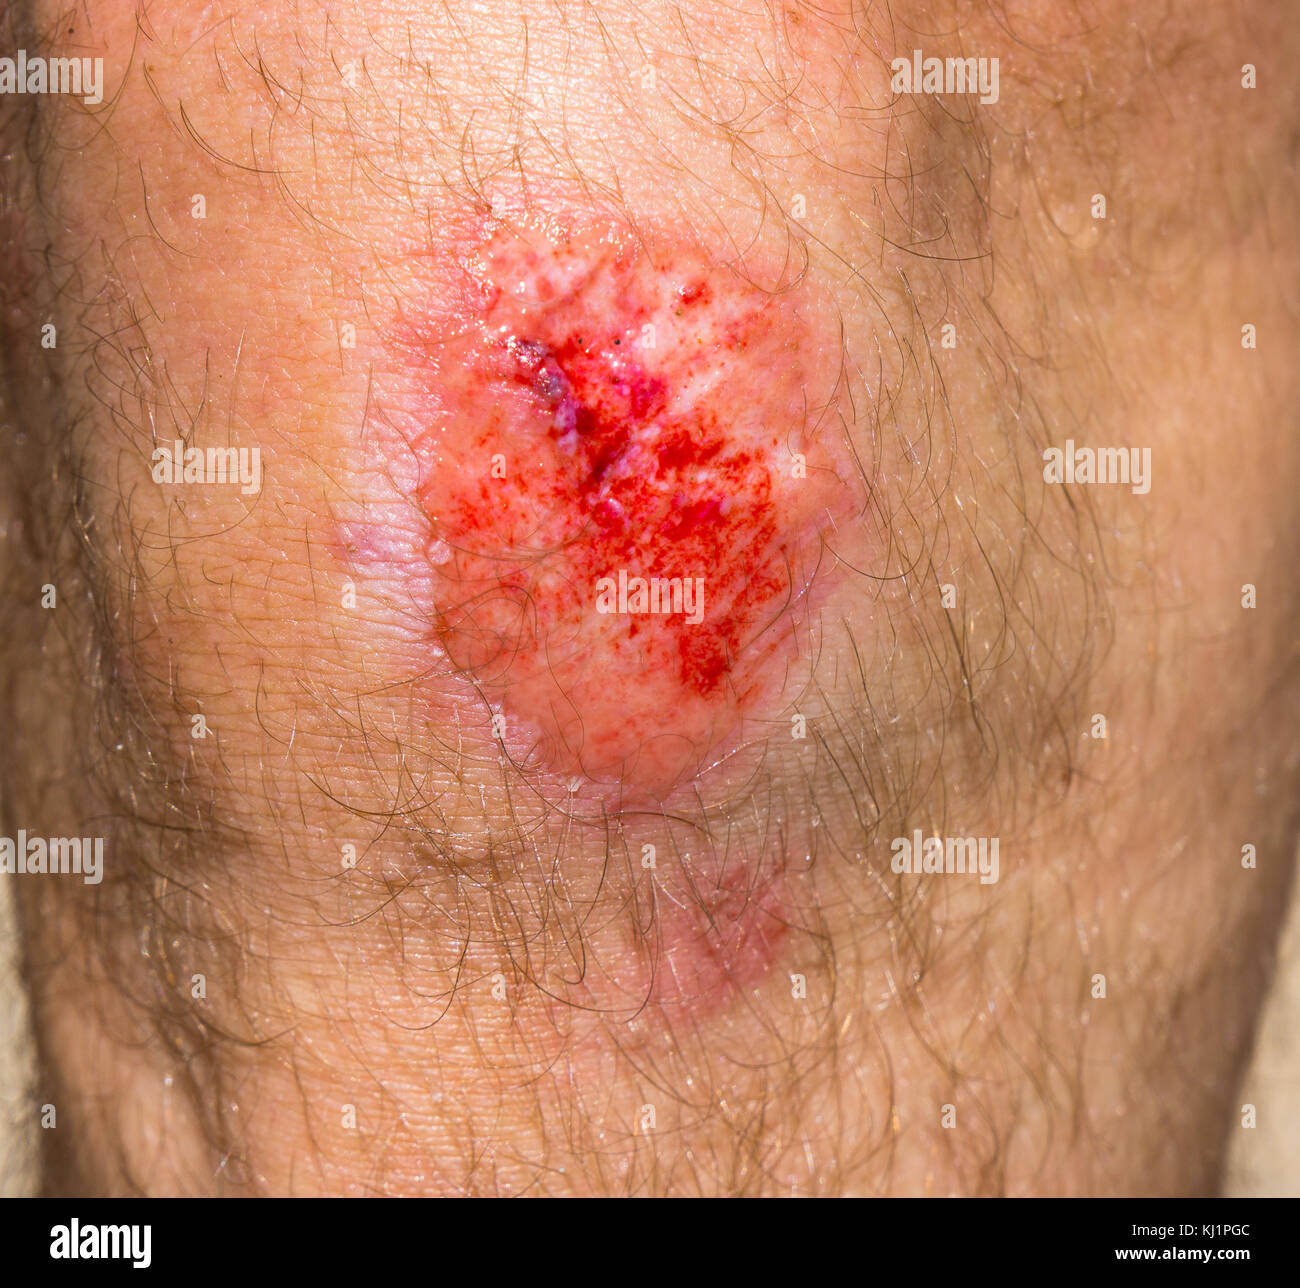 Wound on a knee Stock Photo